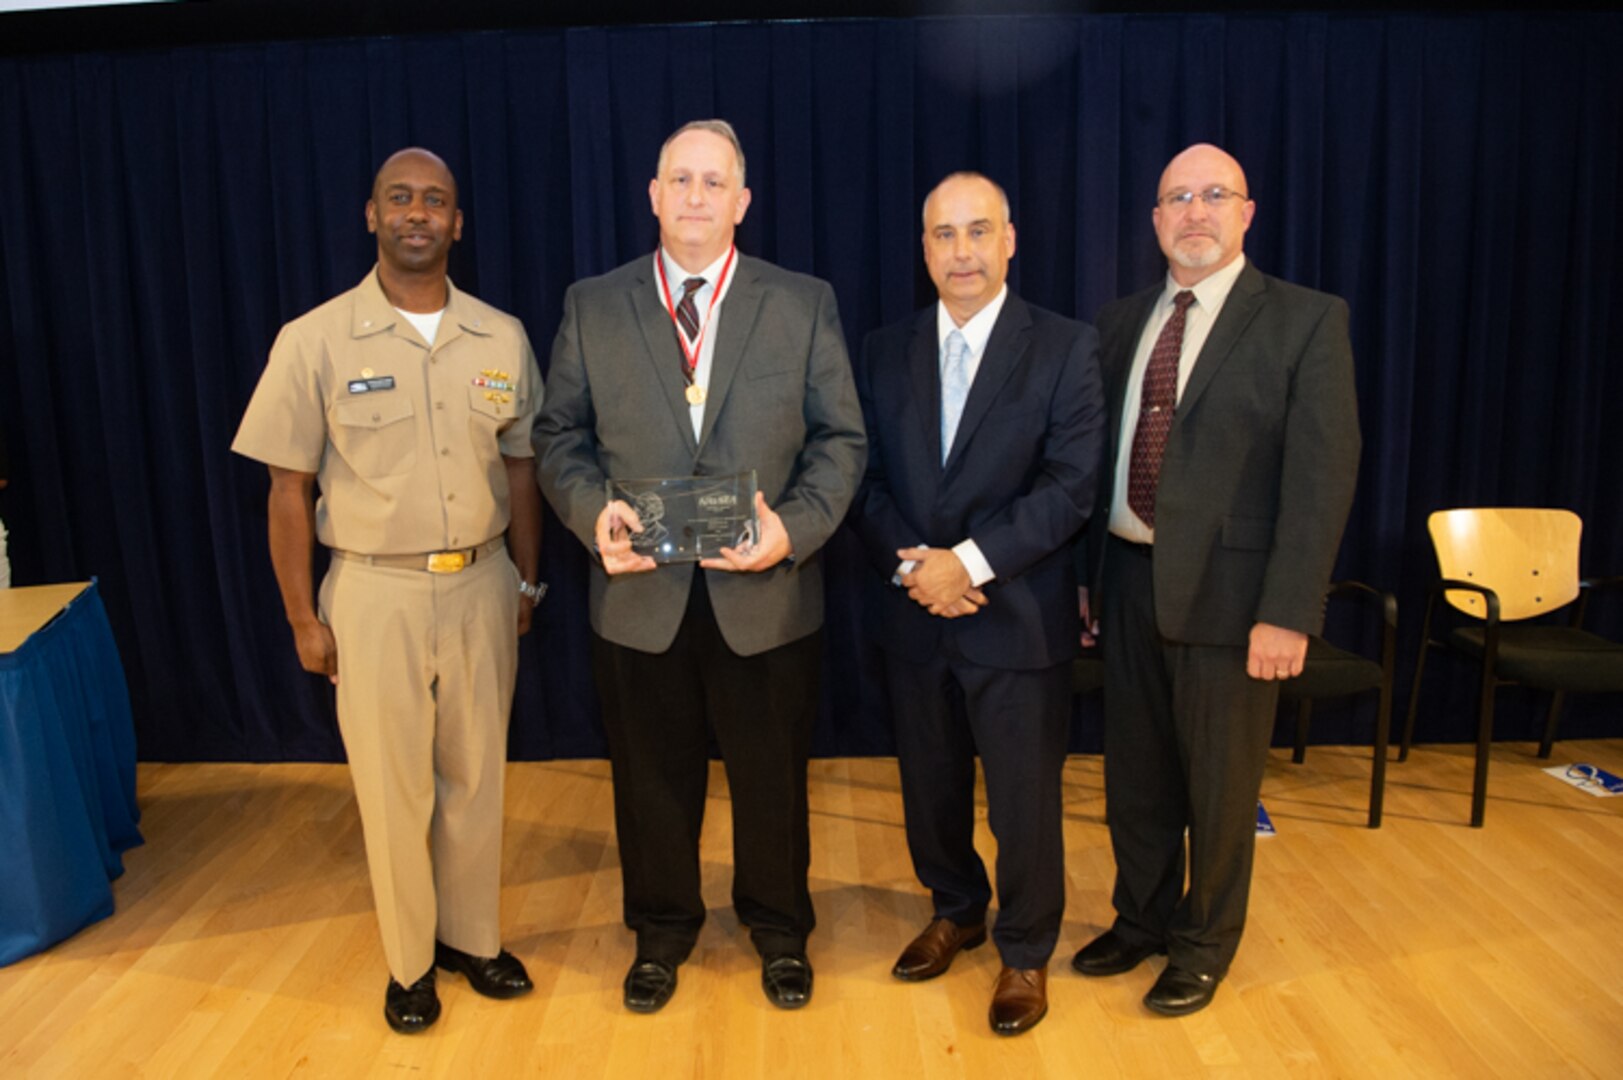 Paul Young, program and engineering manager for Columbia and Virginia pressure hull model programs, receives the Rear Adm. George Melville Award the Naval Surface Warfare Center, Carderock Division Honor Awards on Sept. 10, 2019, in West Bethesda, Md. With Young is Commanding Officer Capt. Cedric McNeal, Technical Director Larry Tarasek and Platform Integrity Department Head Jeff Mercier. (U.S. Navy photo by Nicholas Brezzell/Released)